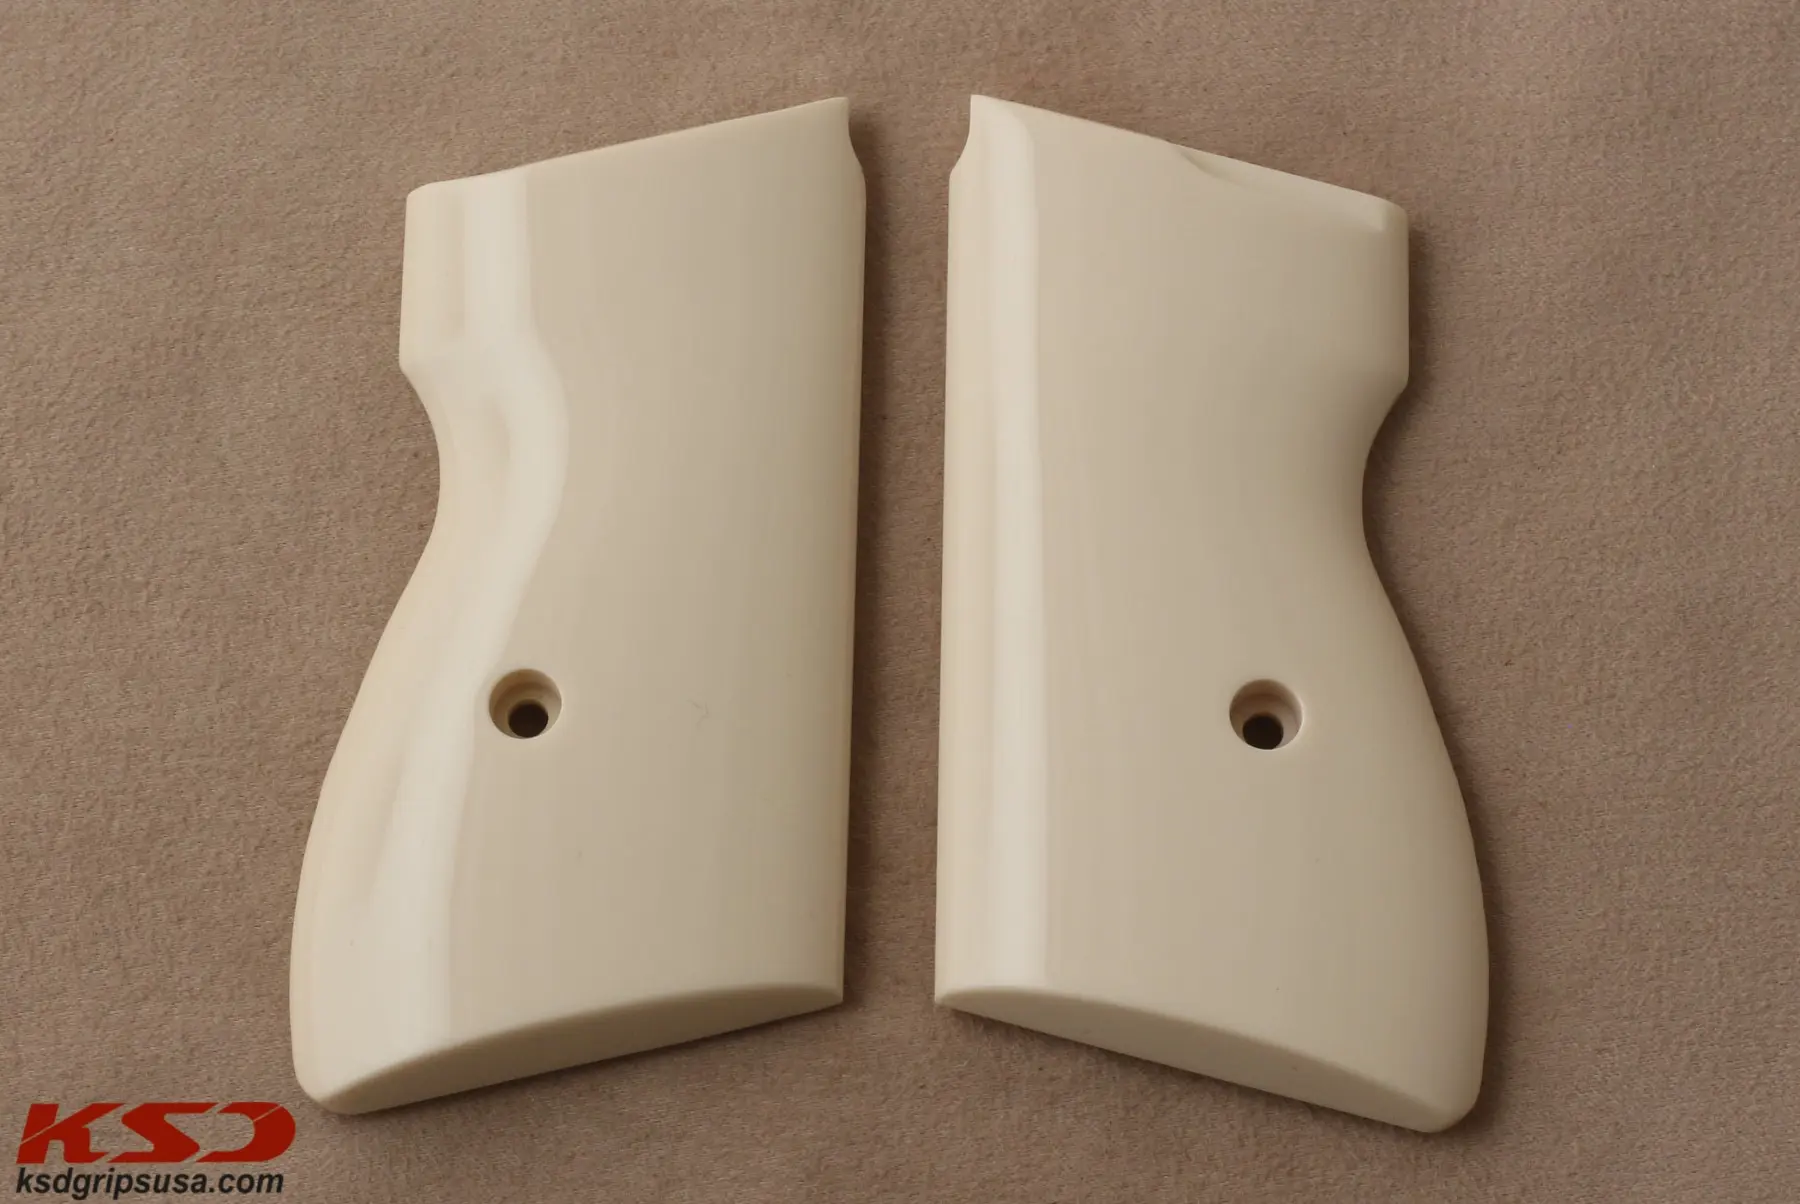 

KSDGrips SLP 1 / 7.65 Model Compatible Ivory Acrylic Grip for Replacement